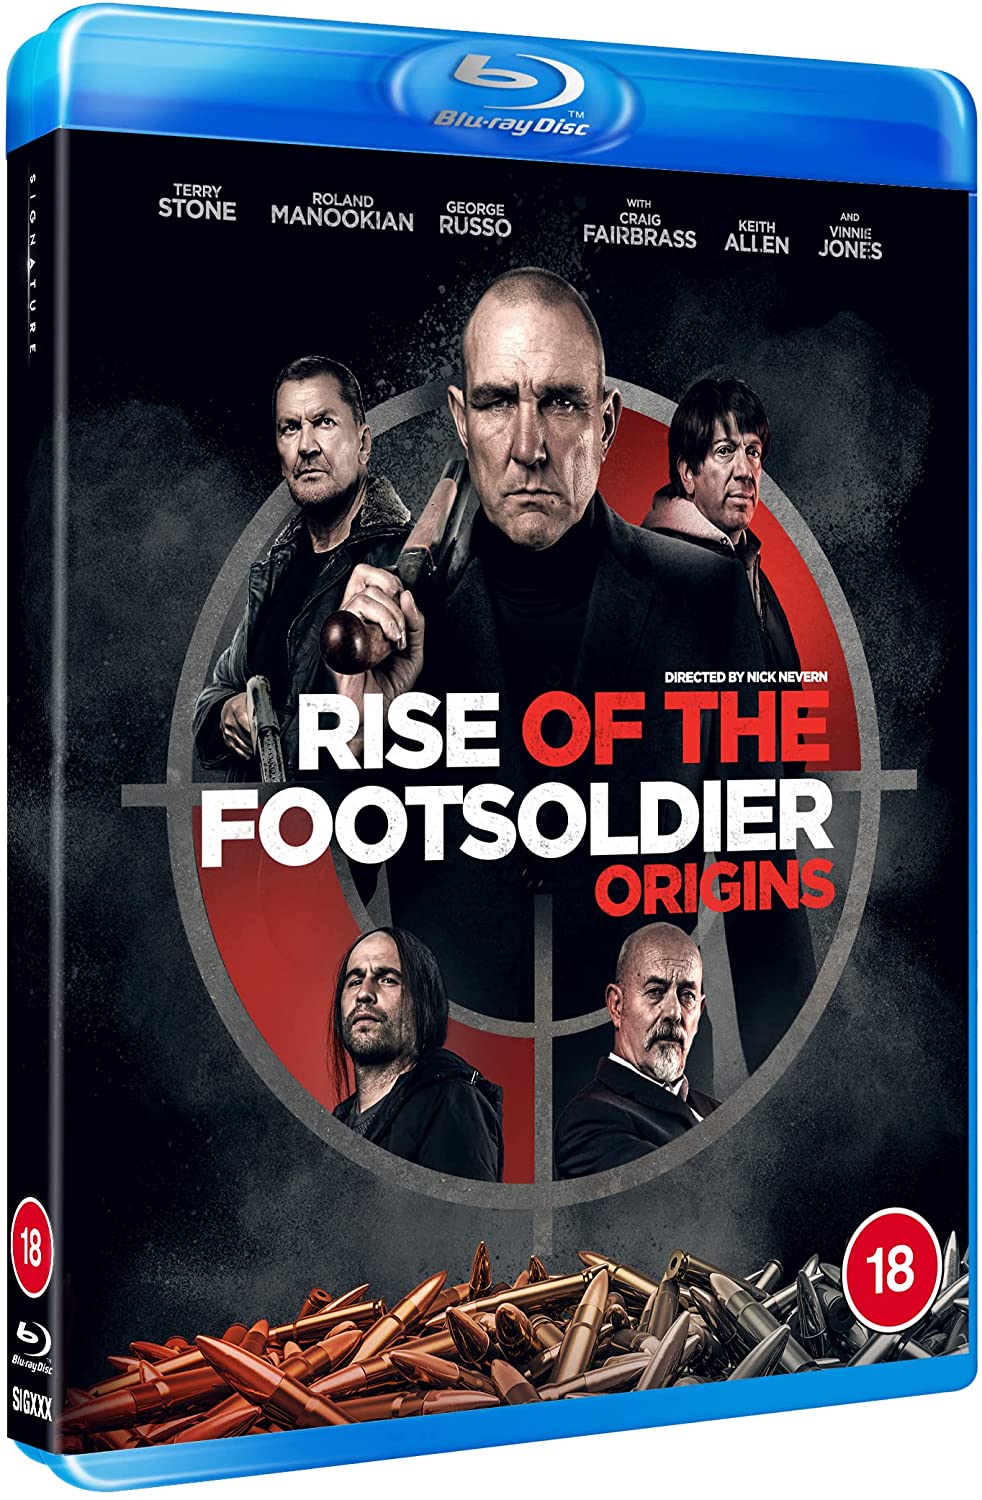 Rise of the Footsoldier: Origins [2021] [Region Free] - Crime/Drama [Blu-ray]